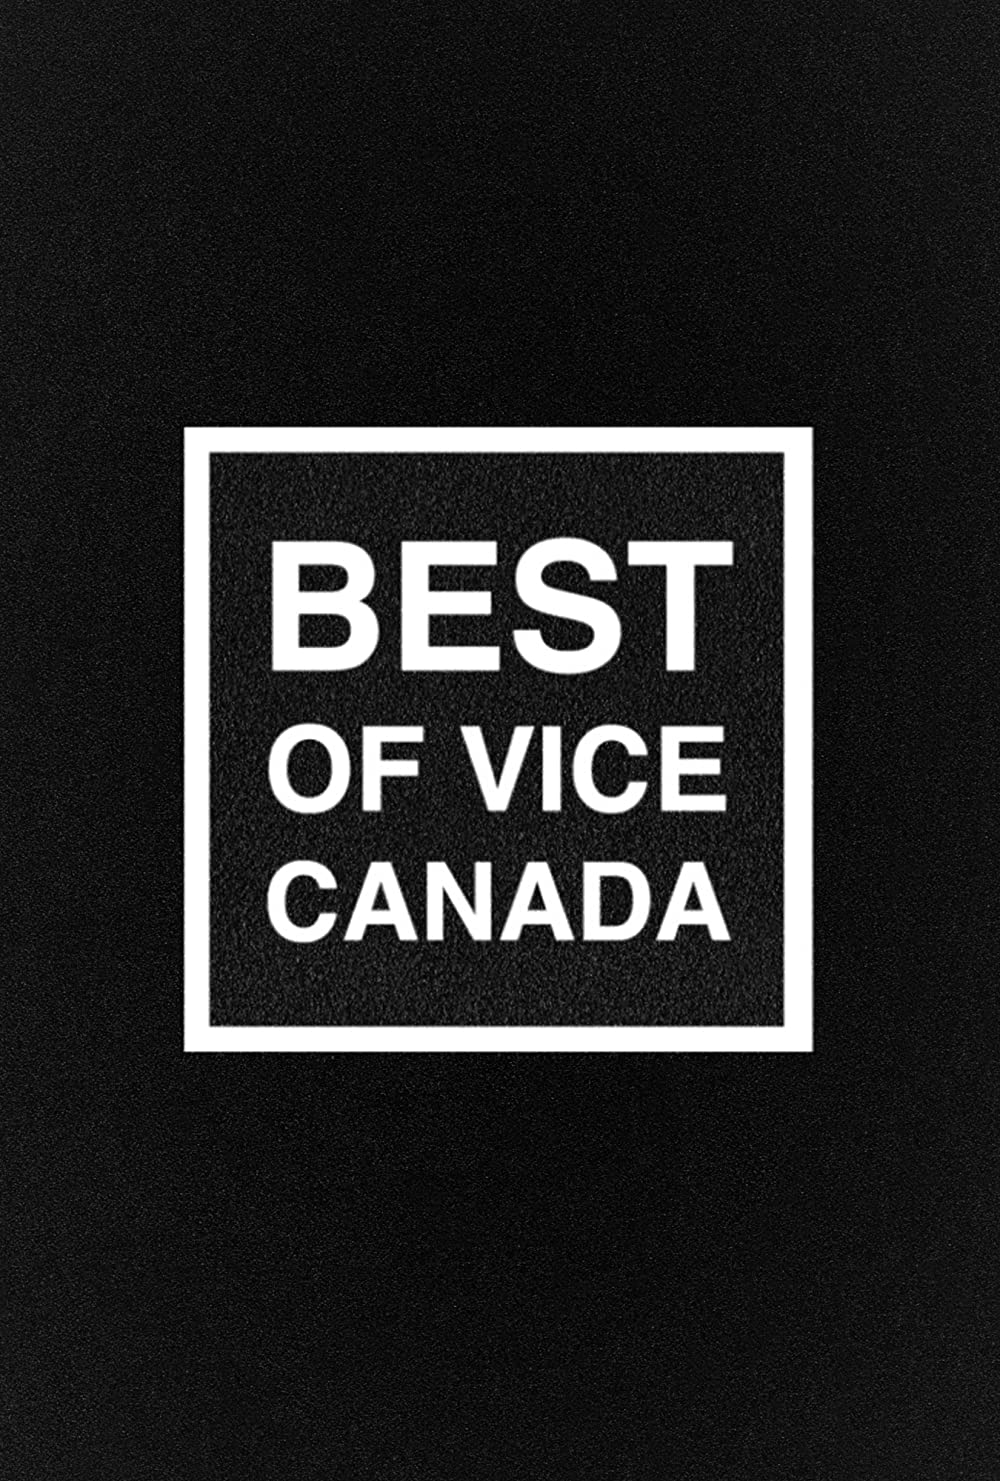 Best of VICE Canada